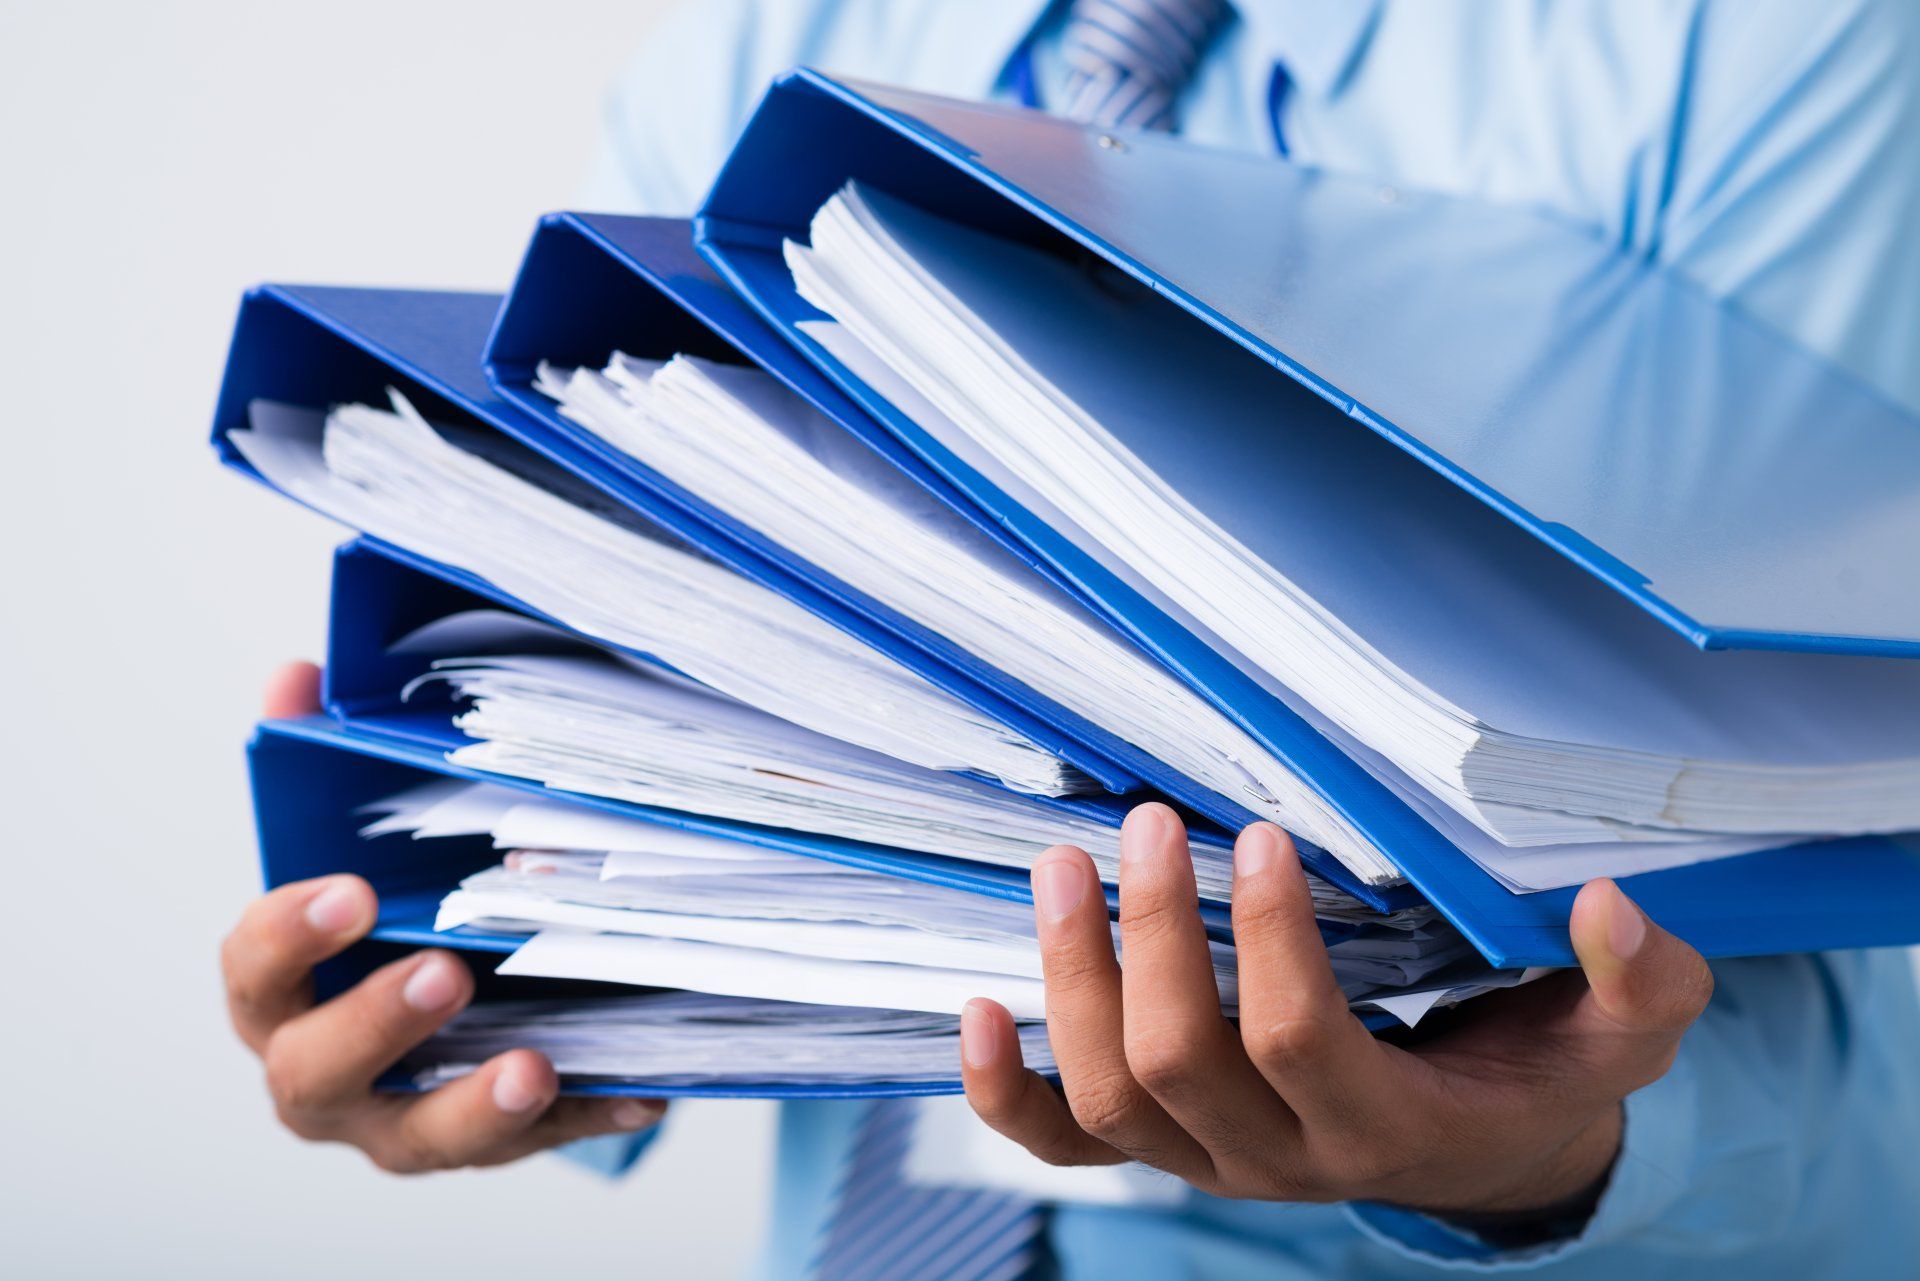 a man in a blue shirt and tie is holding a stack of blue binders filled with papers .